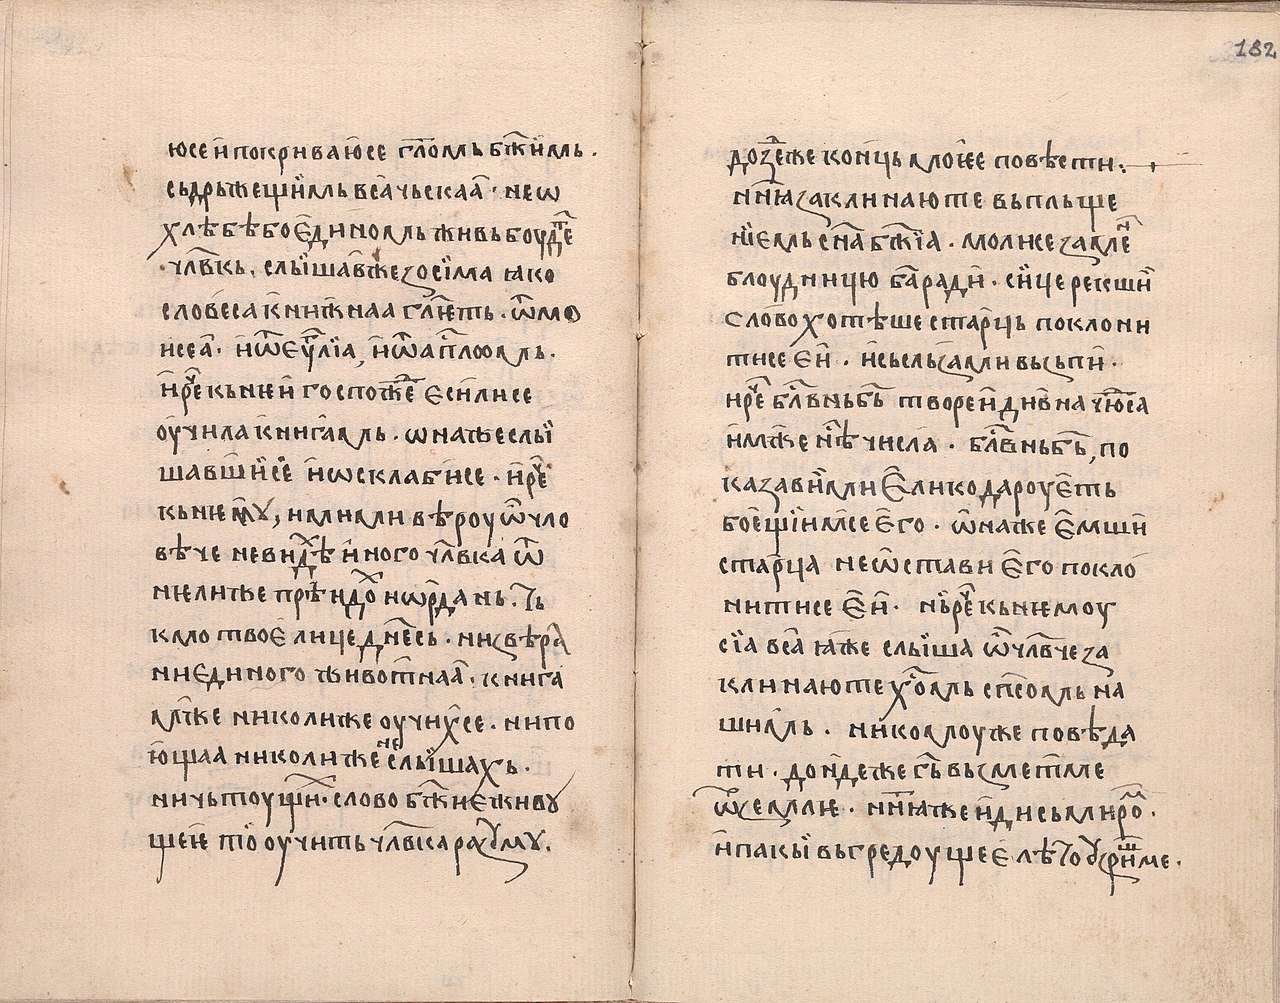 Pages from a book written in Old Slavonic.